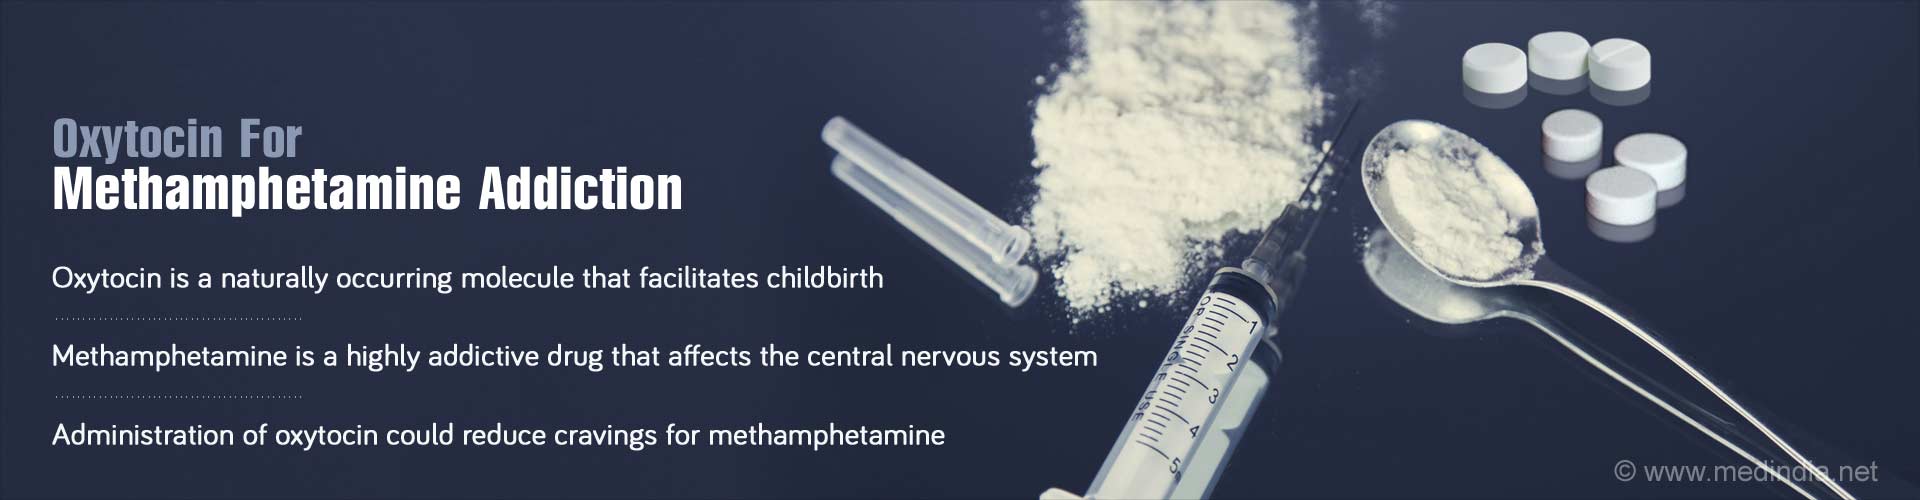 Oxytocin For Methamphetamine Addiction
- Oxytocin is a naturally occurring molecule that facilitates childbirth
- Methamphetamine is a highly addictive drug that affects the central nervous system
- Administration of oxytocin could reduce ravings for methamphetamine